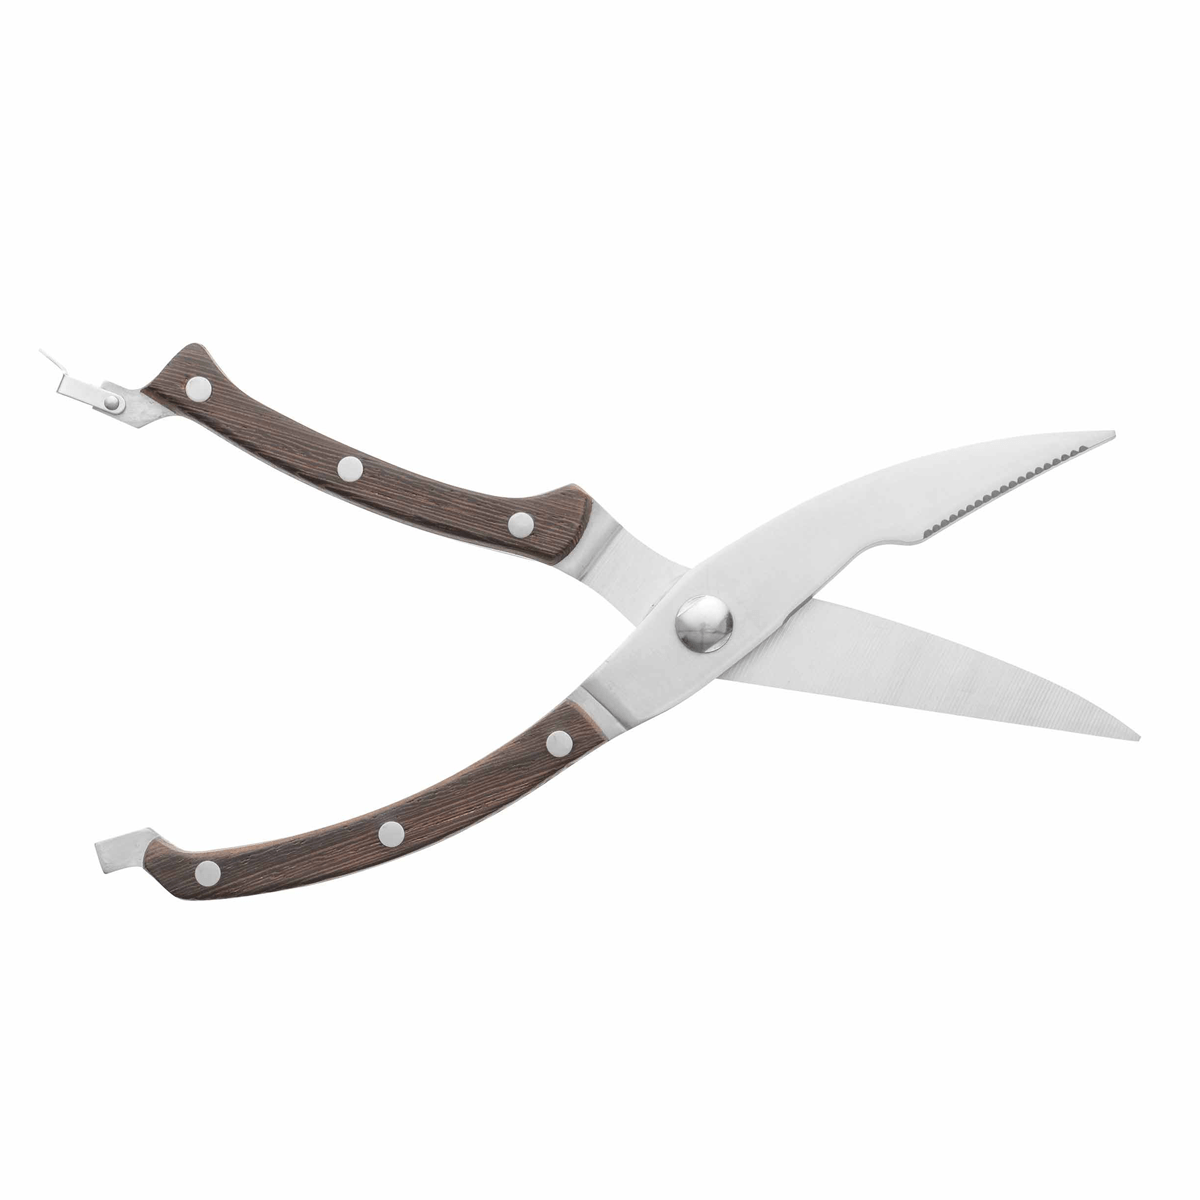 Poultry shears with dark wooden handle - Essentials